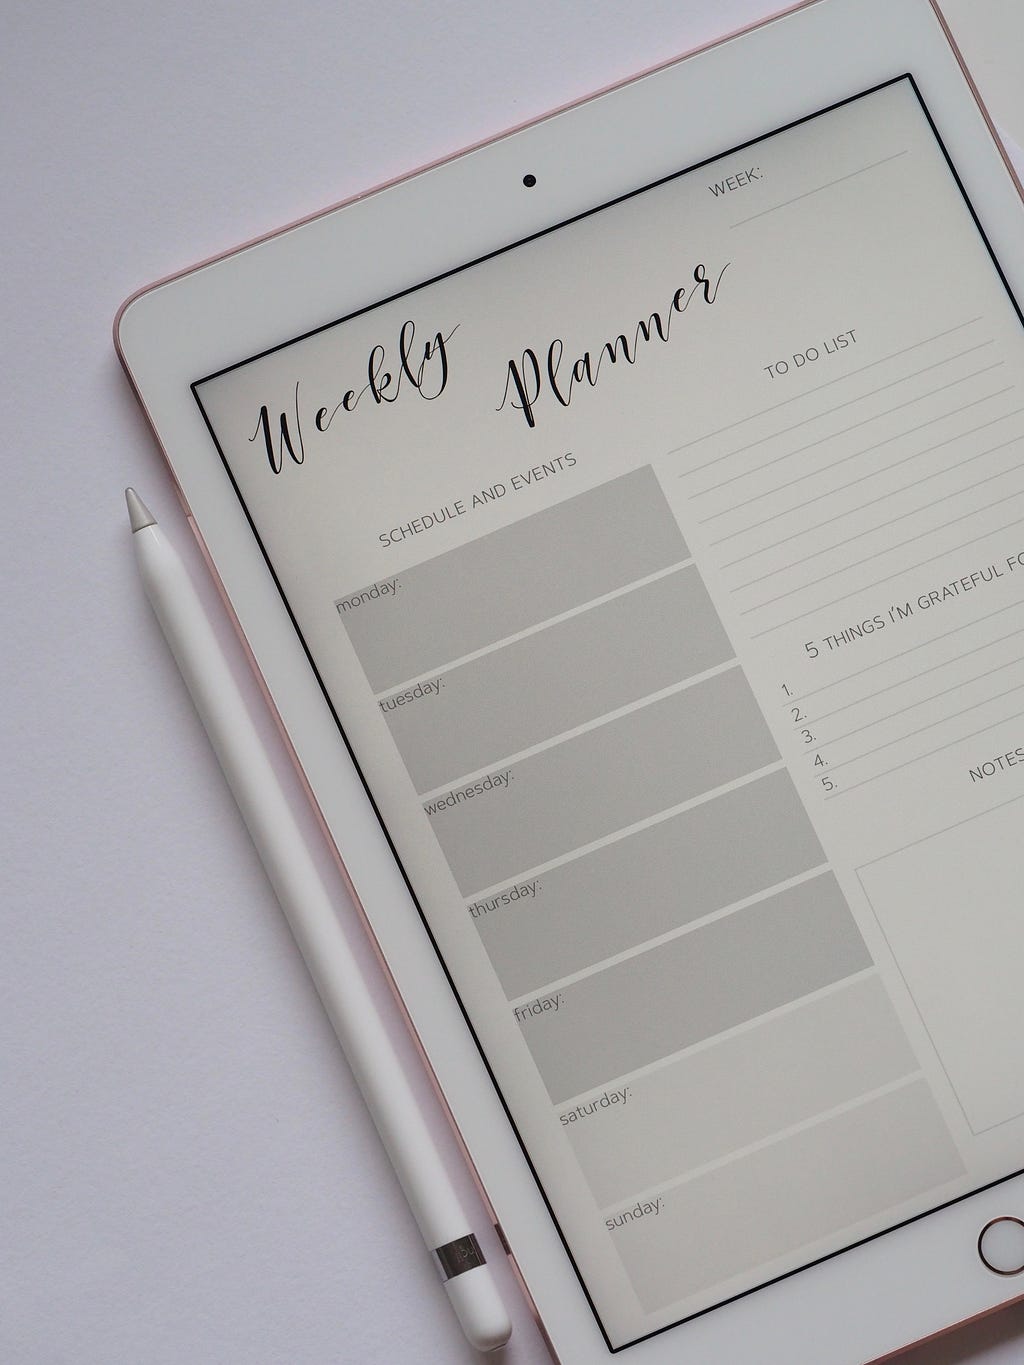 A digital planner on a tablet screen. It reads, “Weekly Planner” in cursive at the top.